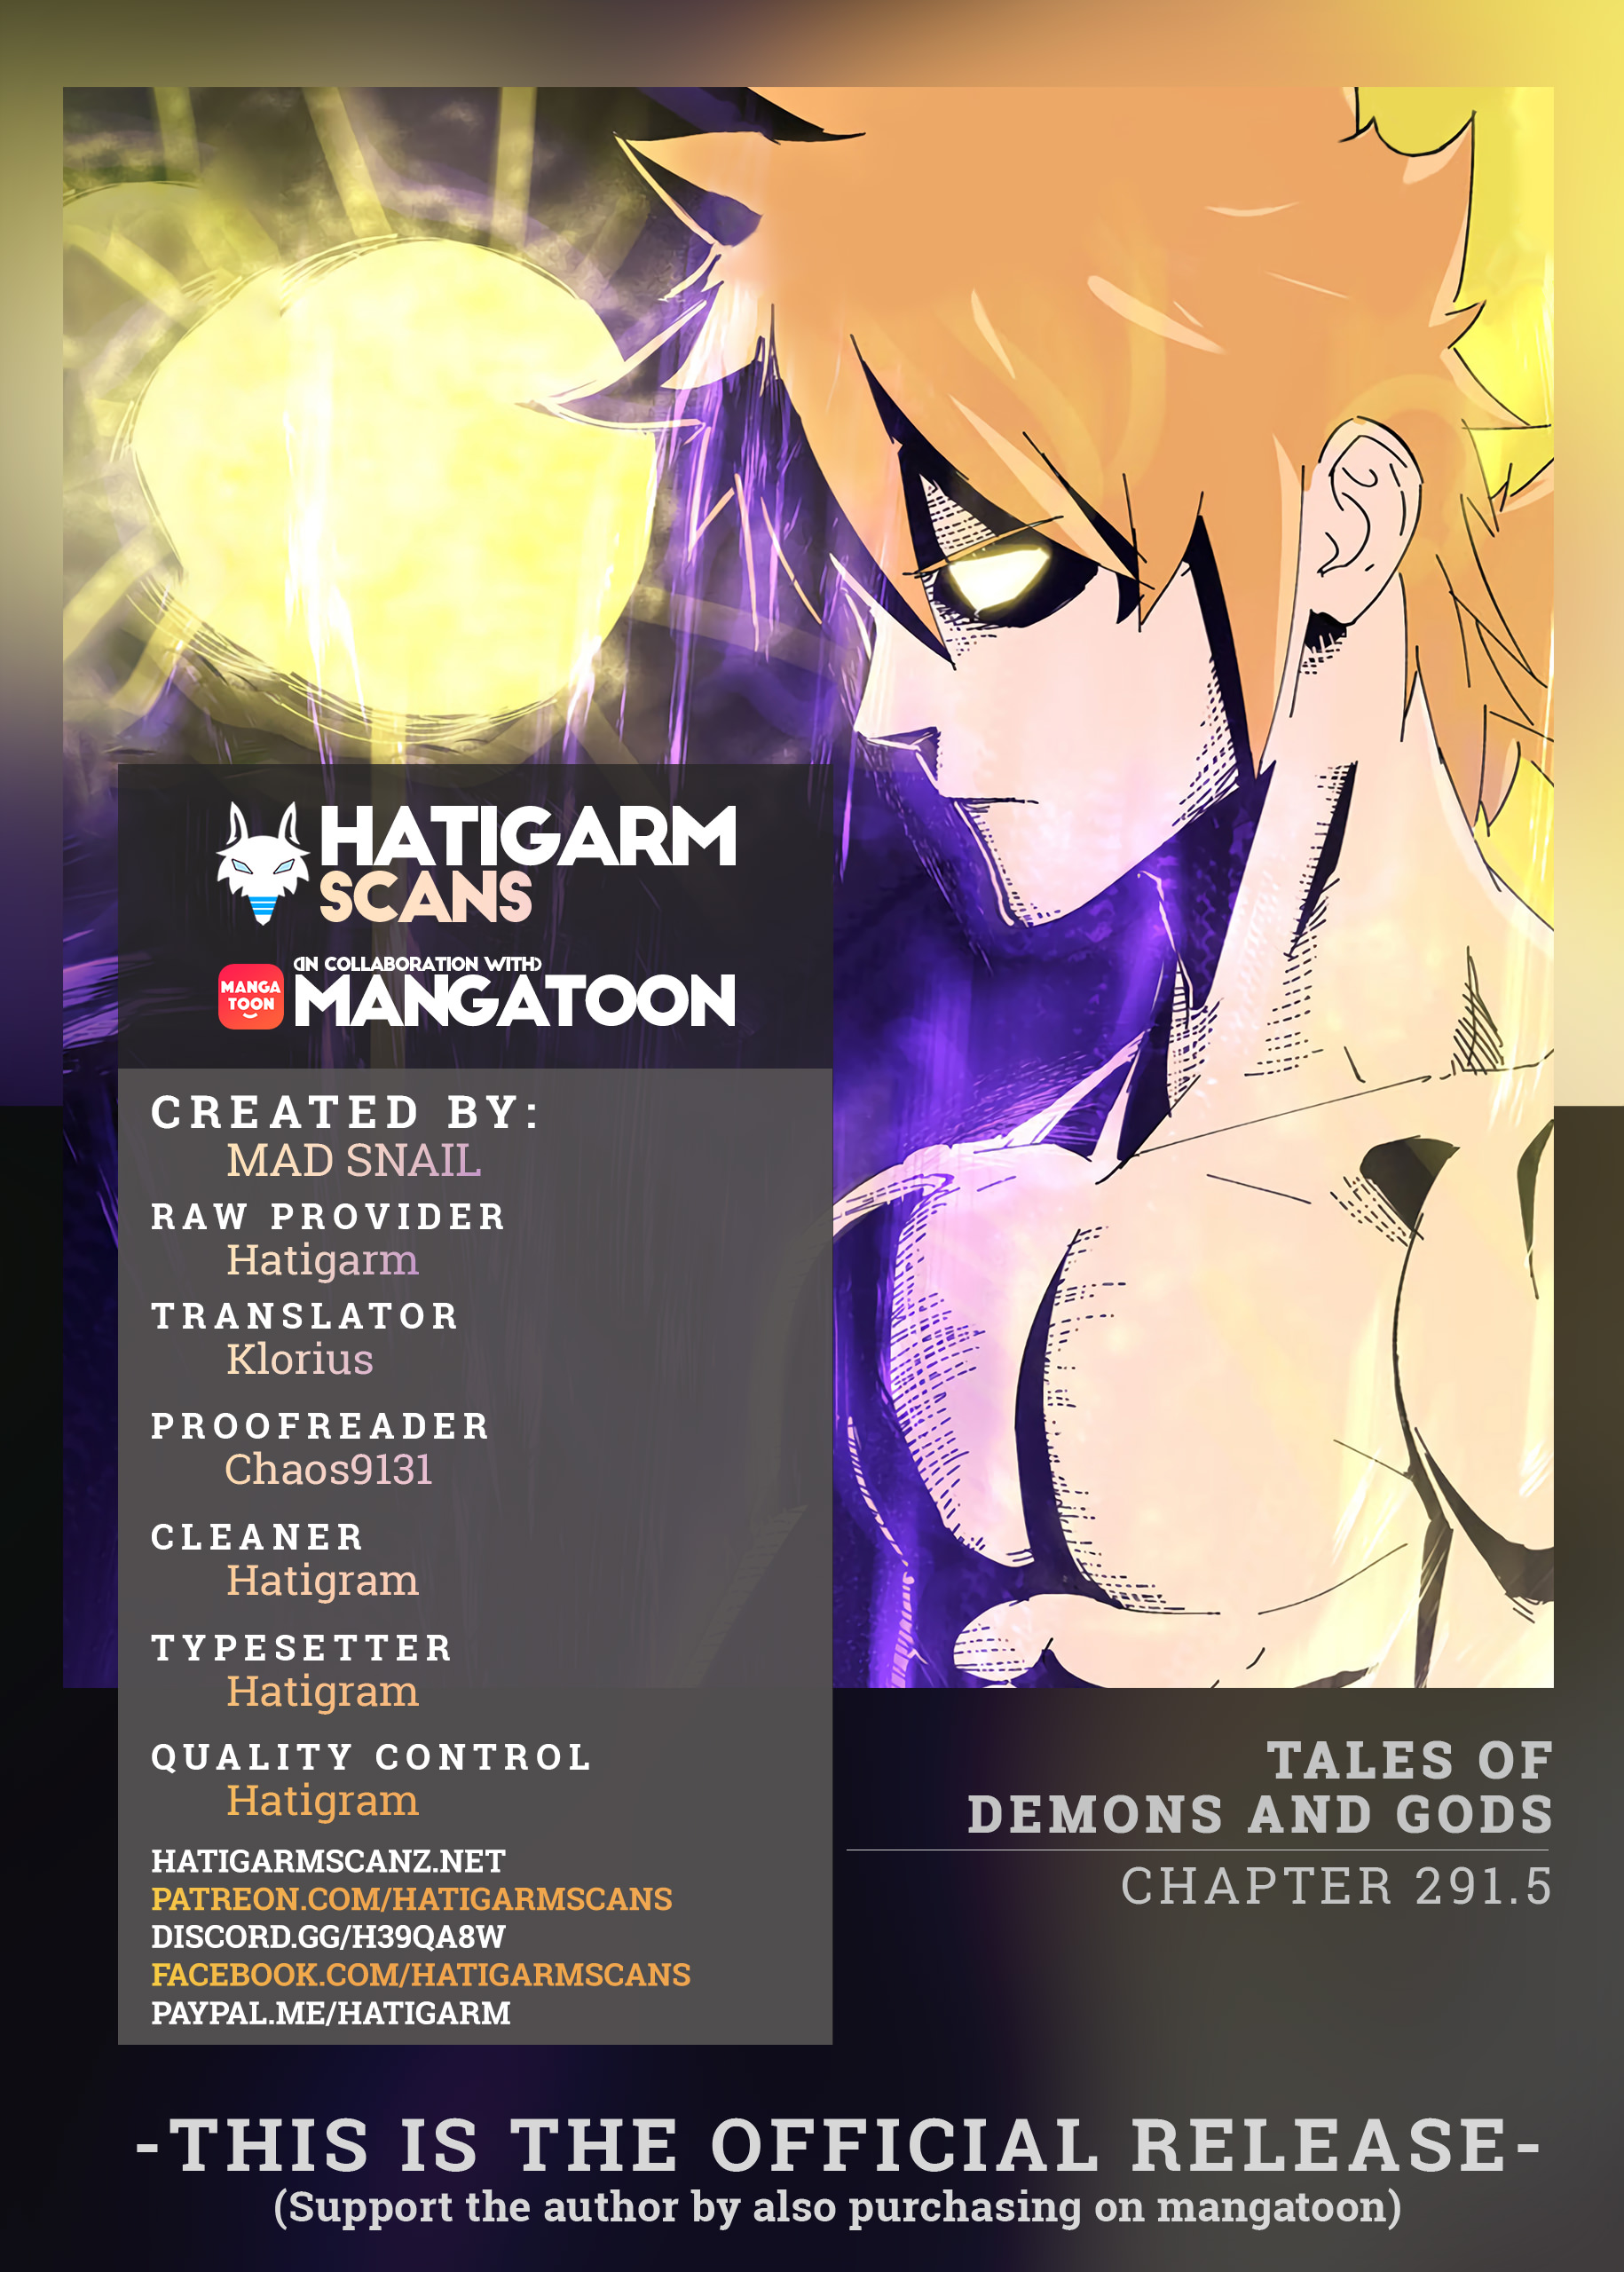 Tales of Demons and Gods - Chapter 6339 - Arrival of The Demon Lord (Part 2)
 - Image 1